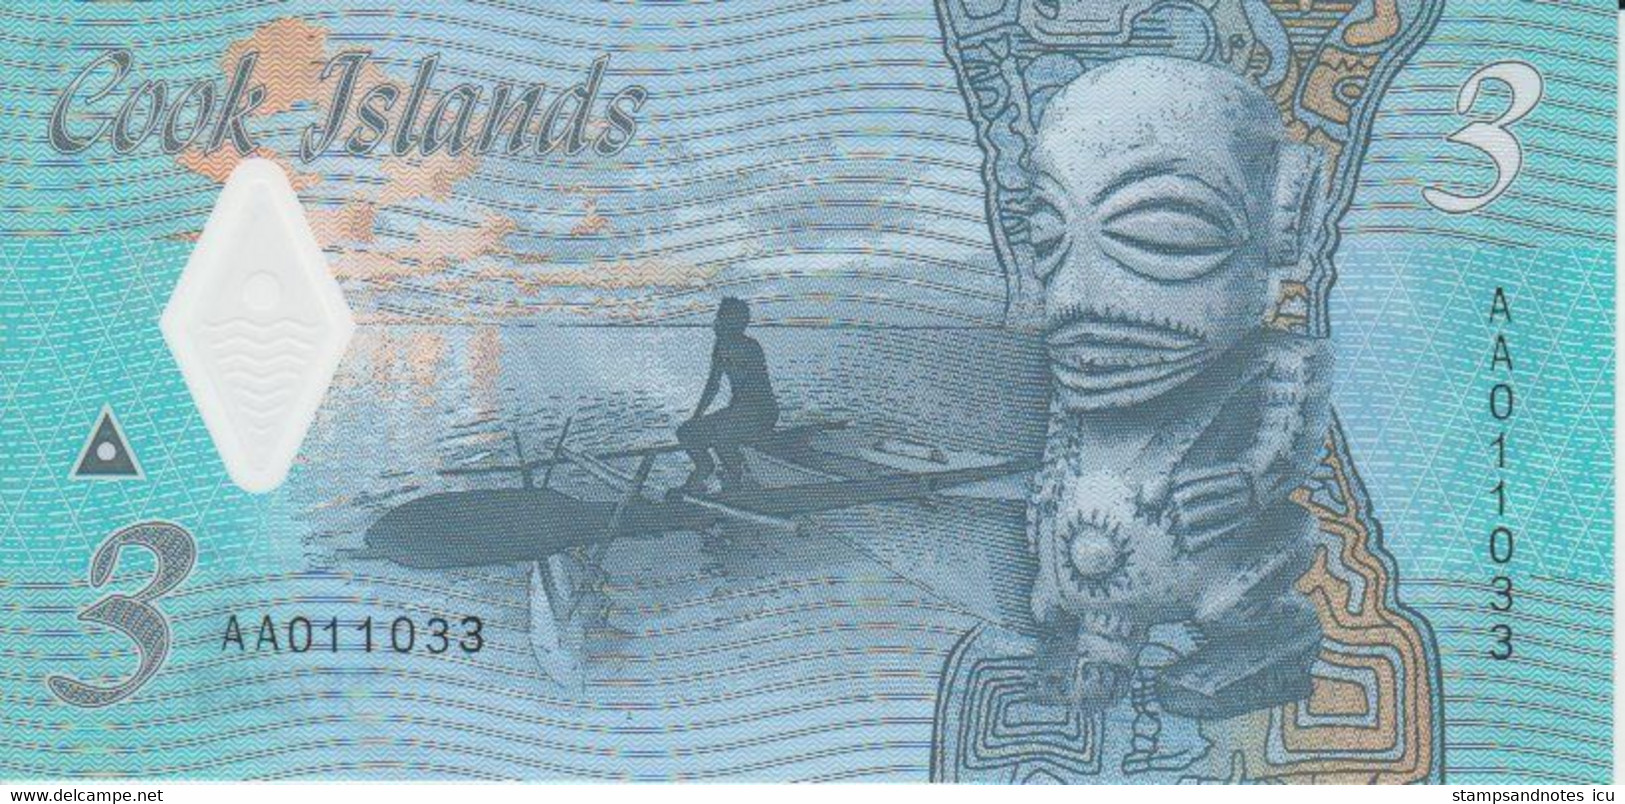 Cook Islands 3 Dollars ND ( 2021 ) P New 11 UNC Polymer Nice Number 011033 - Cook